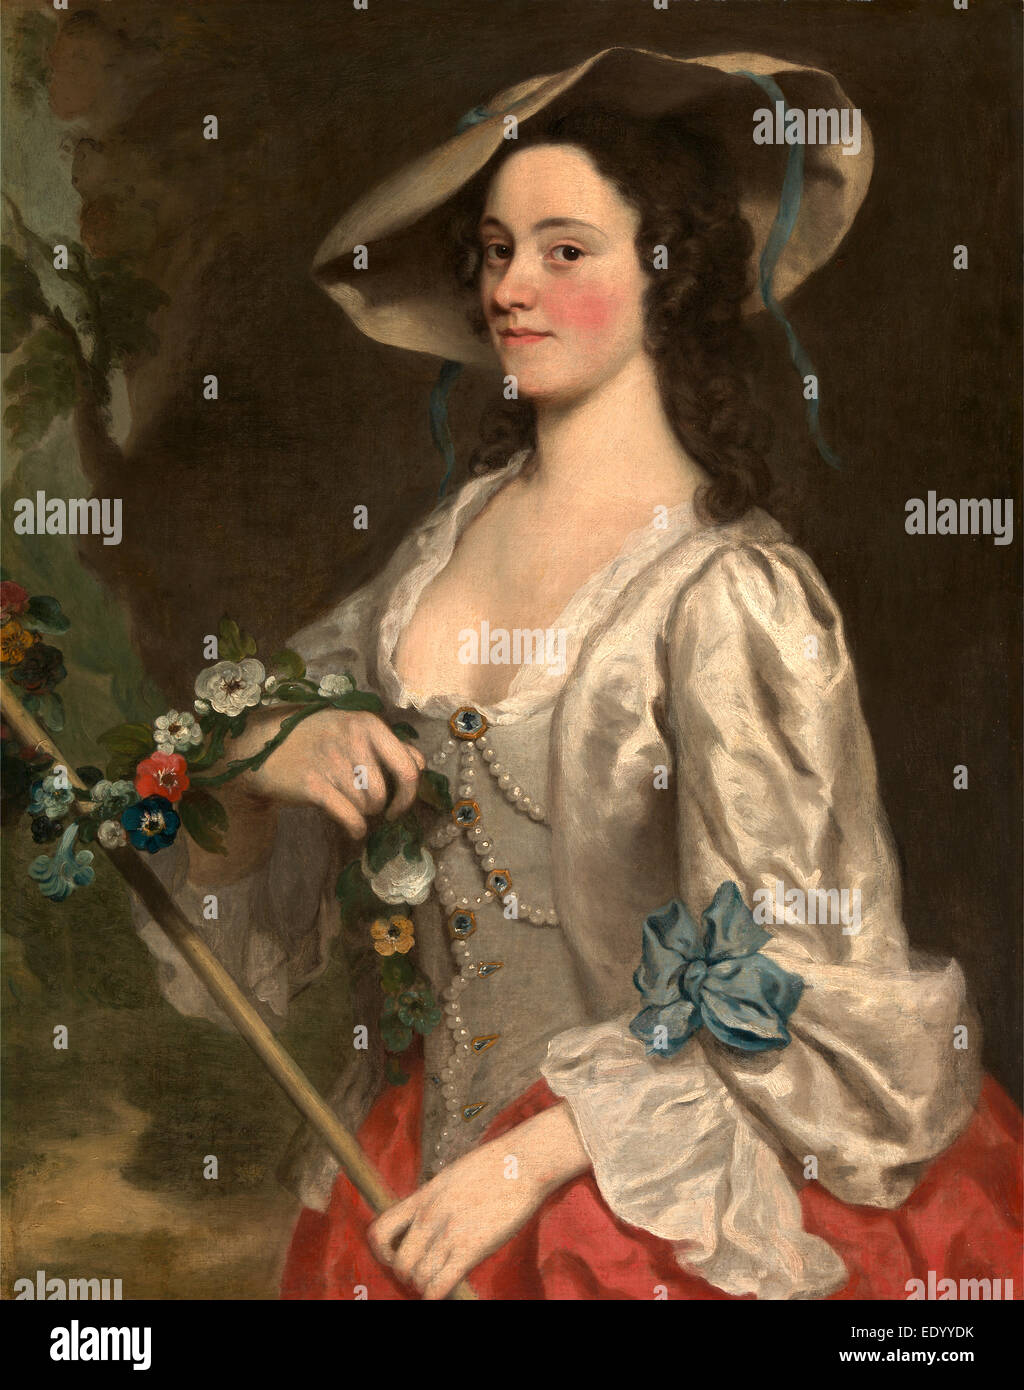 Portrait of a Woman A Woman in Shepherdess' Costume Signed in brown paint (abraded), lower left: "GKna[...] | Pinxt" Stock Photo